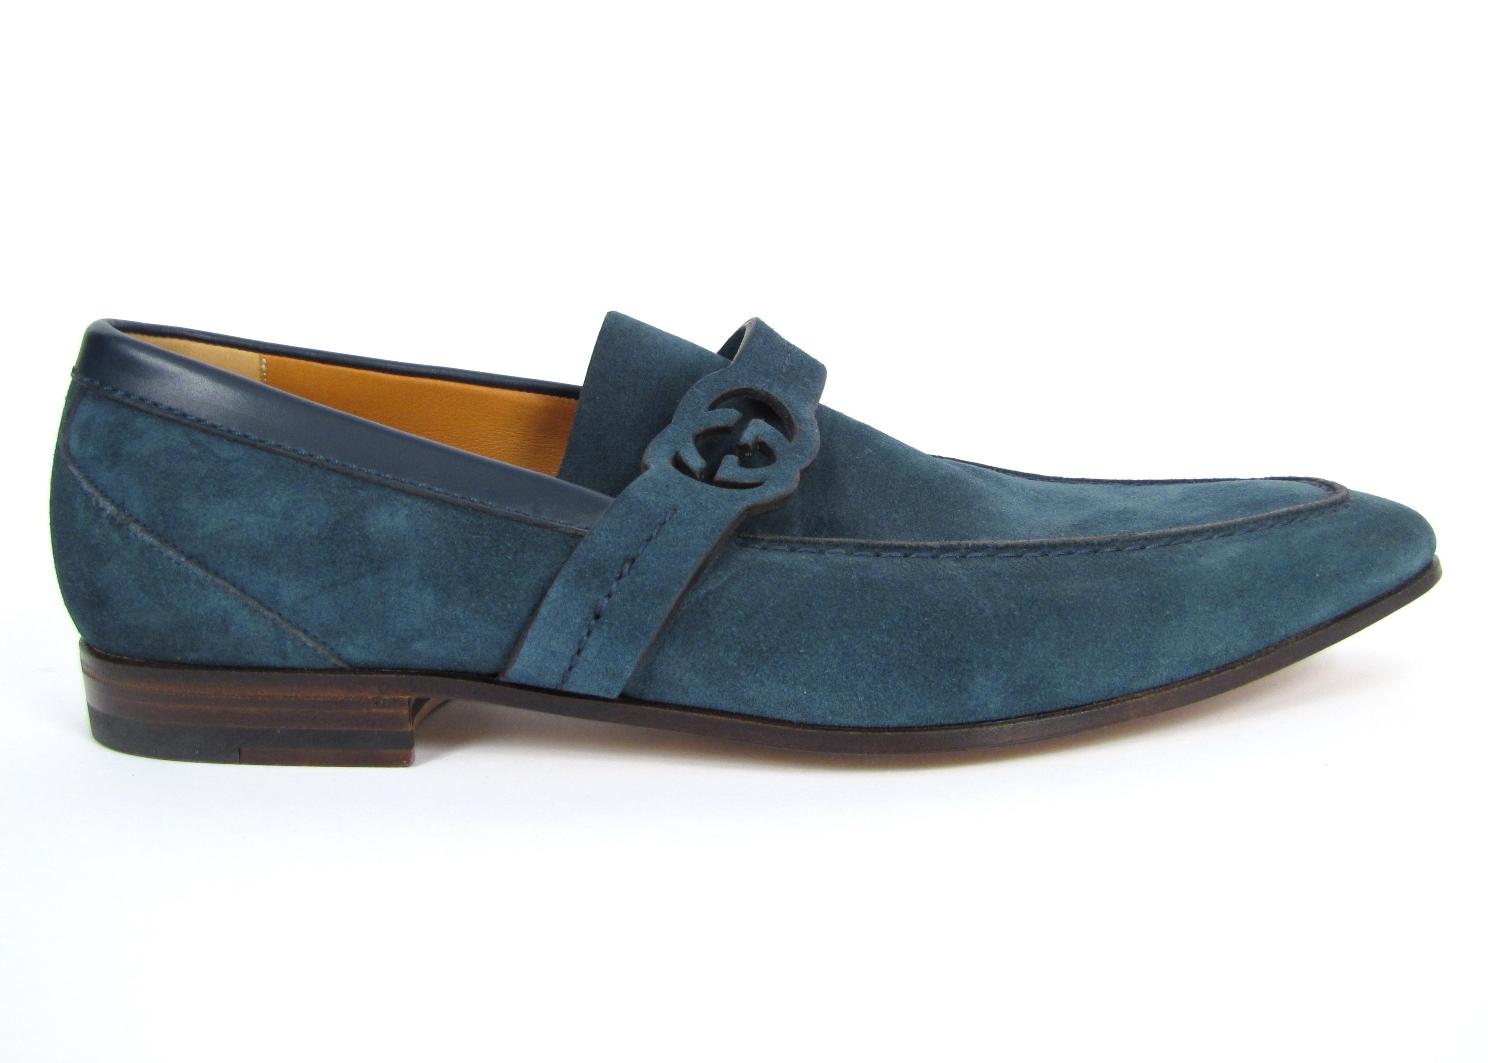 Mens Gucci Blue Suede Double G Logo Leather Loafers Dress Shoes Size 10.5 NEW